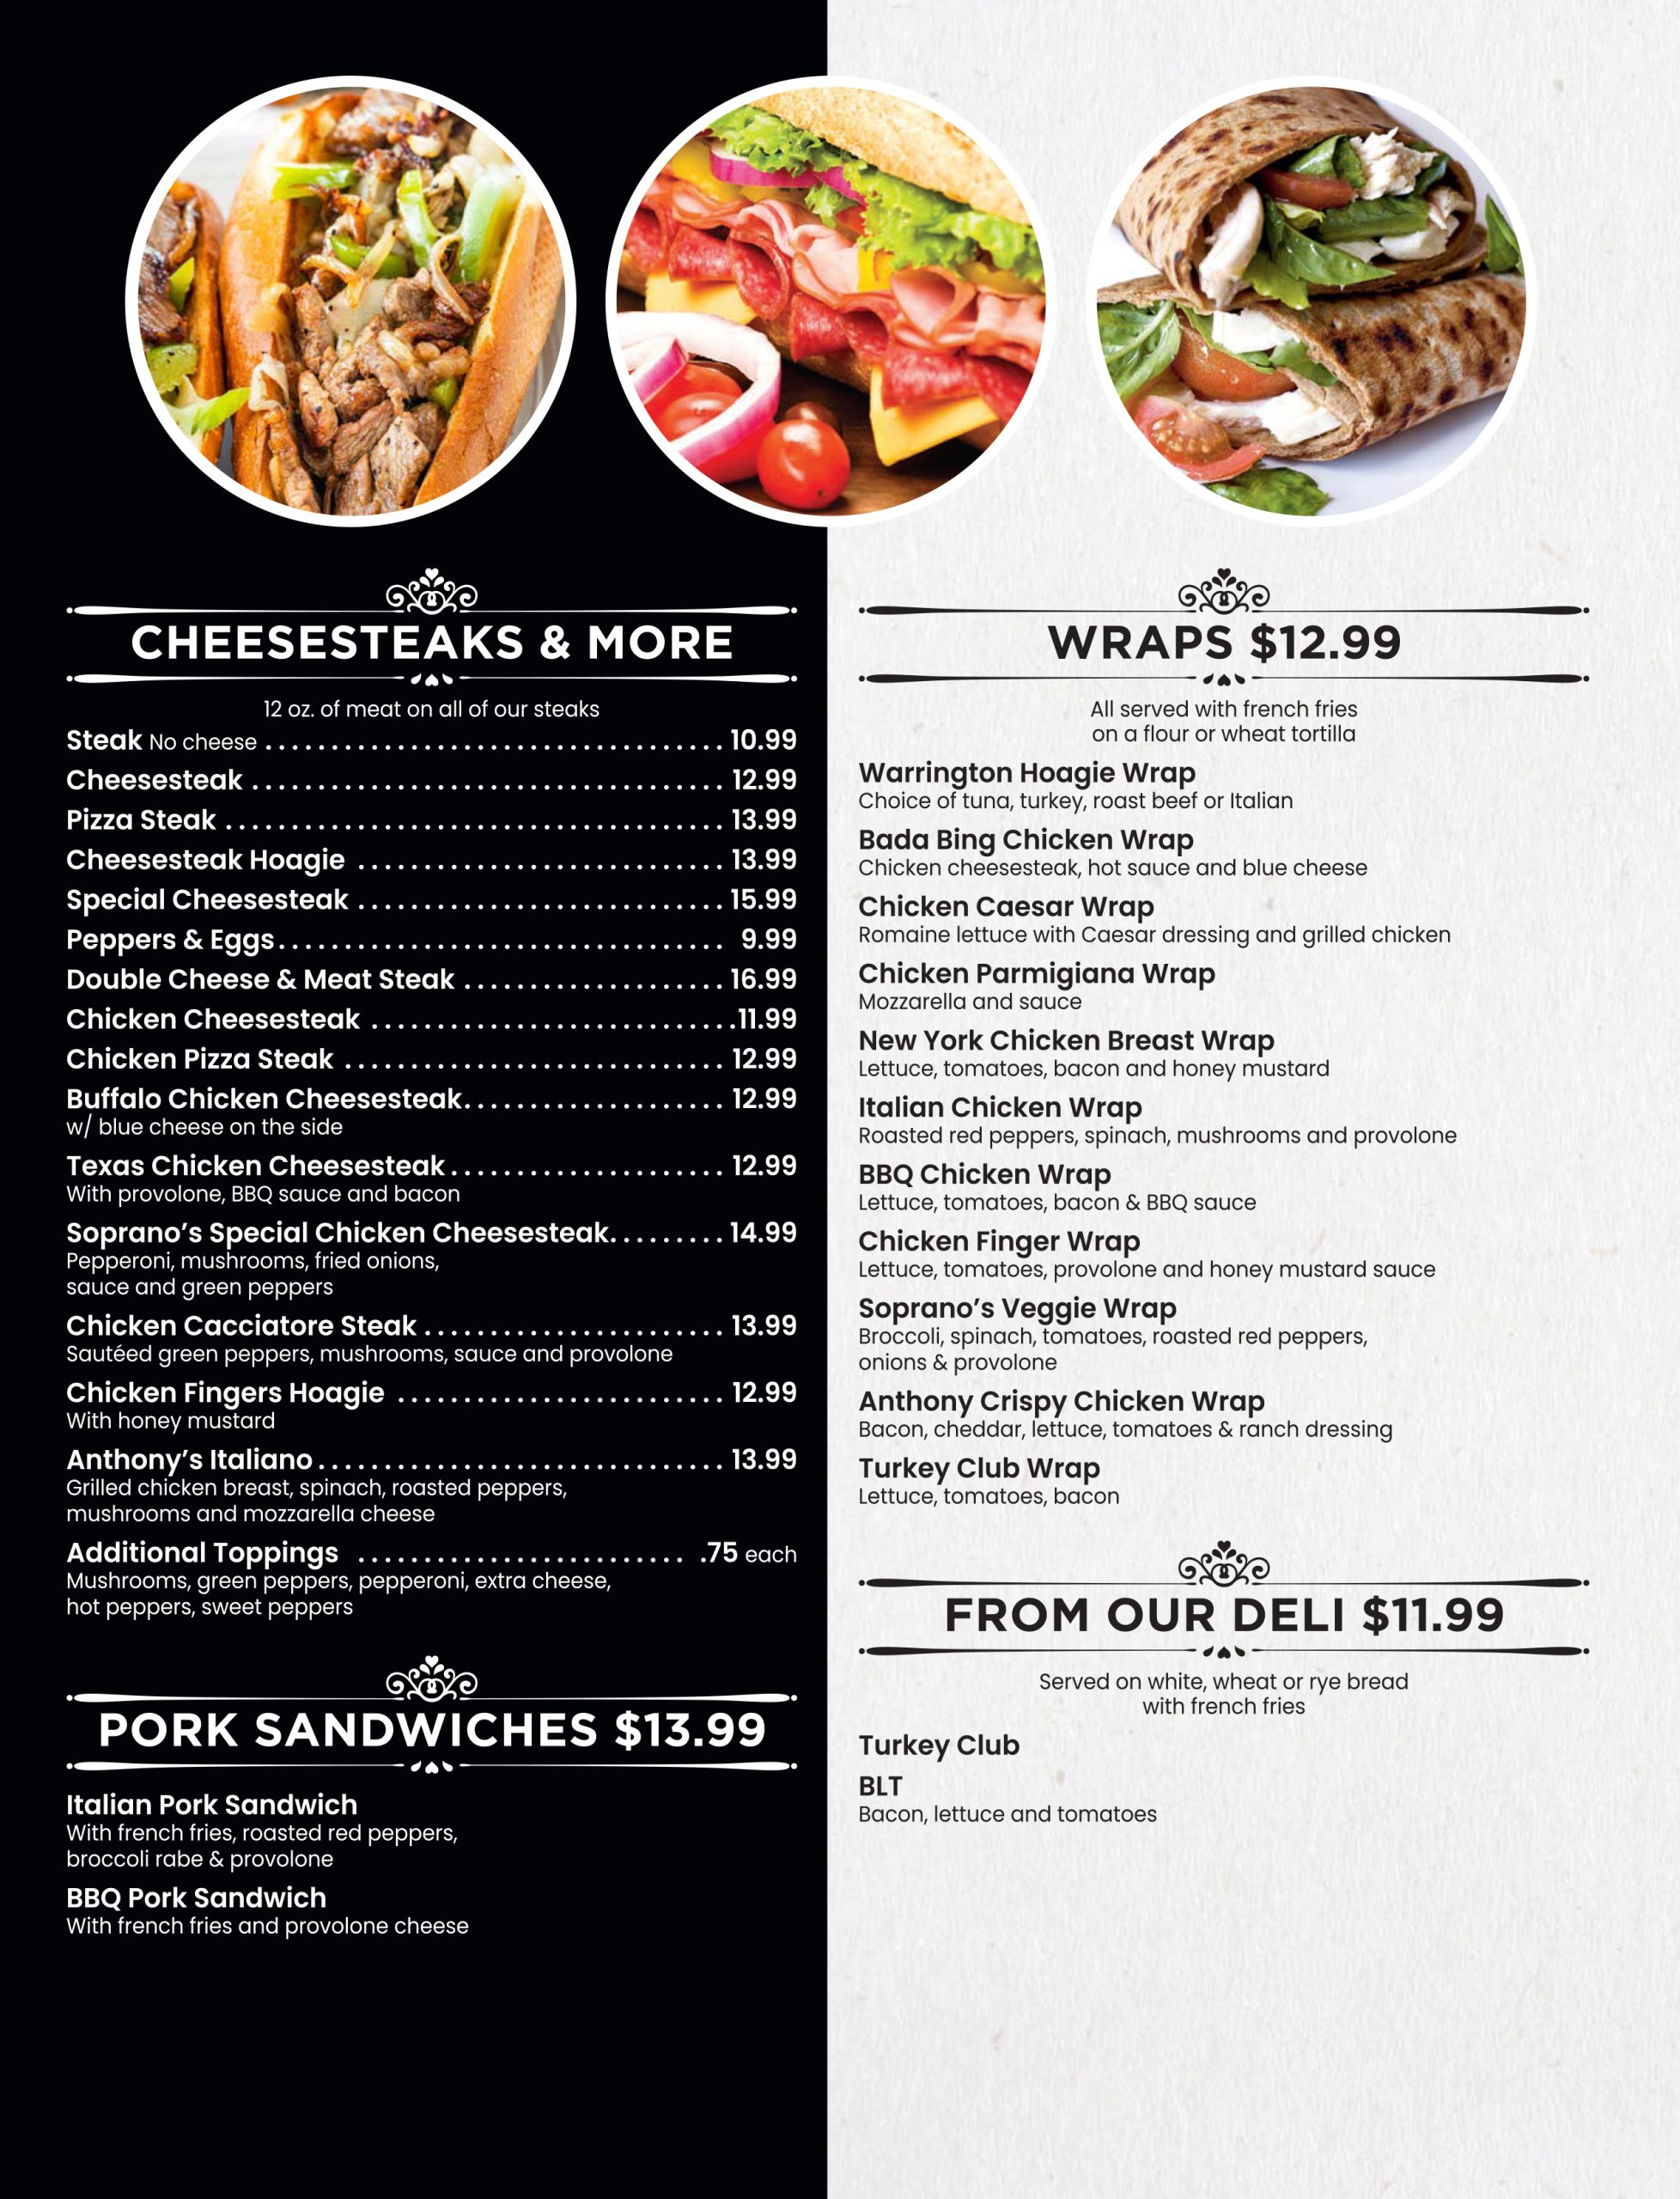 Menu showcasing a variety of cheesesteaks, wraps, and sandwiches with prices and descriptions.